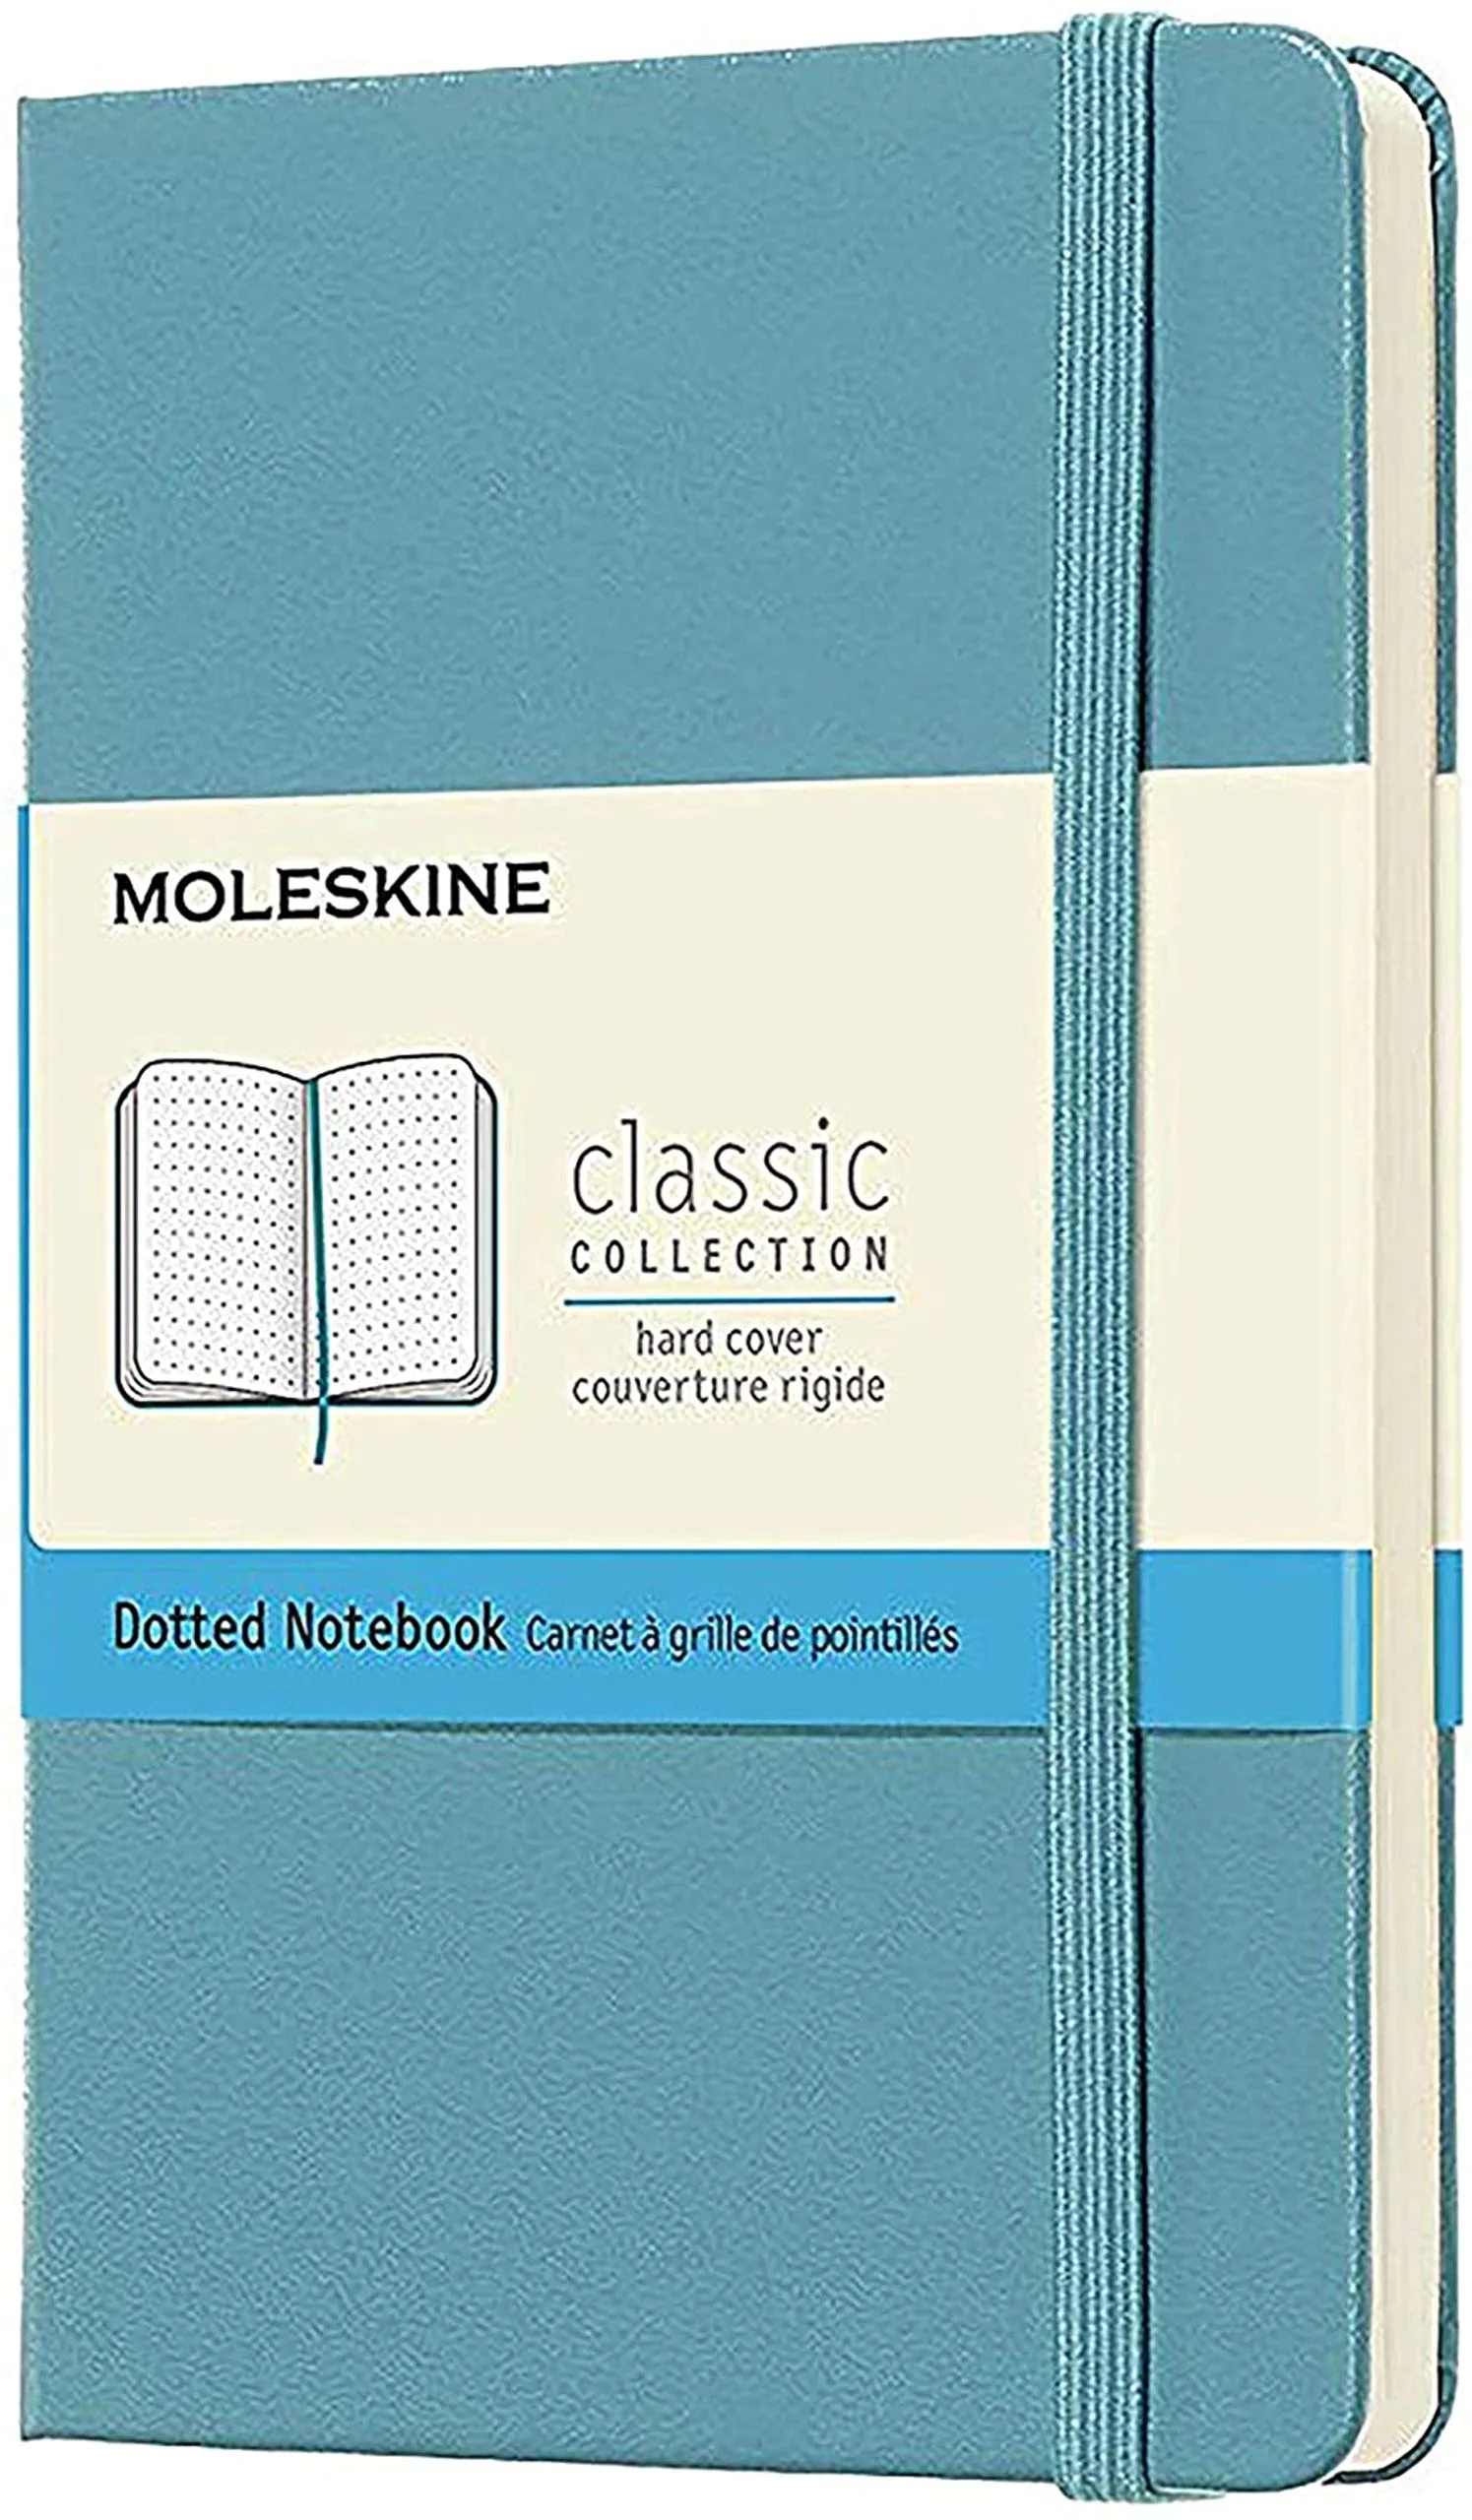 Moleskine Classic Dotted Pocket Notebook, Hard Cover, Black 